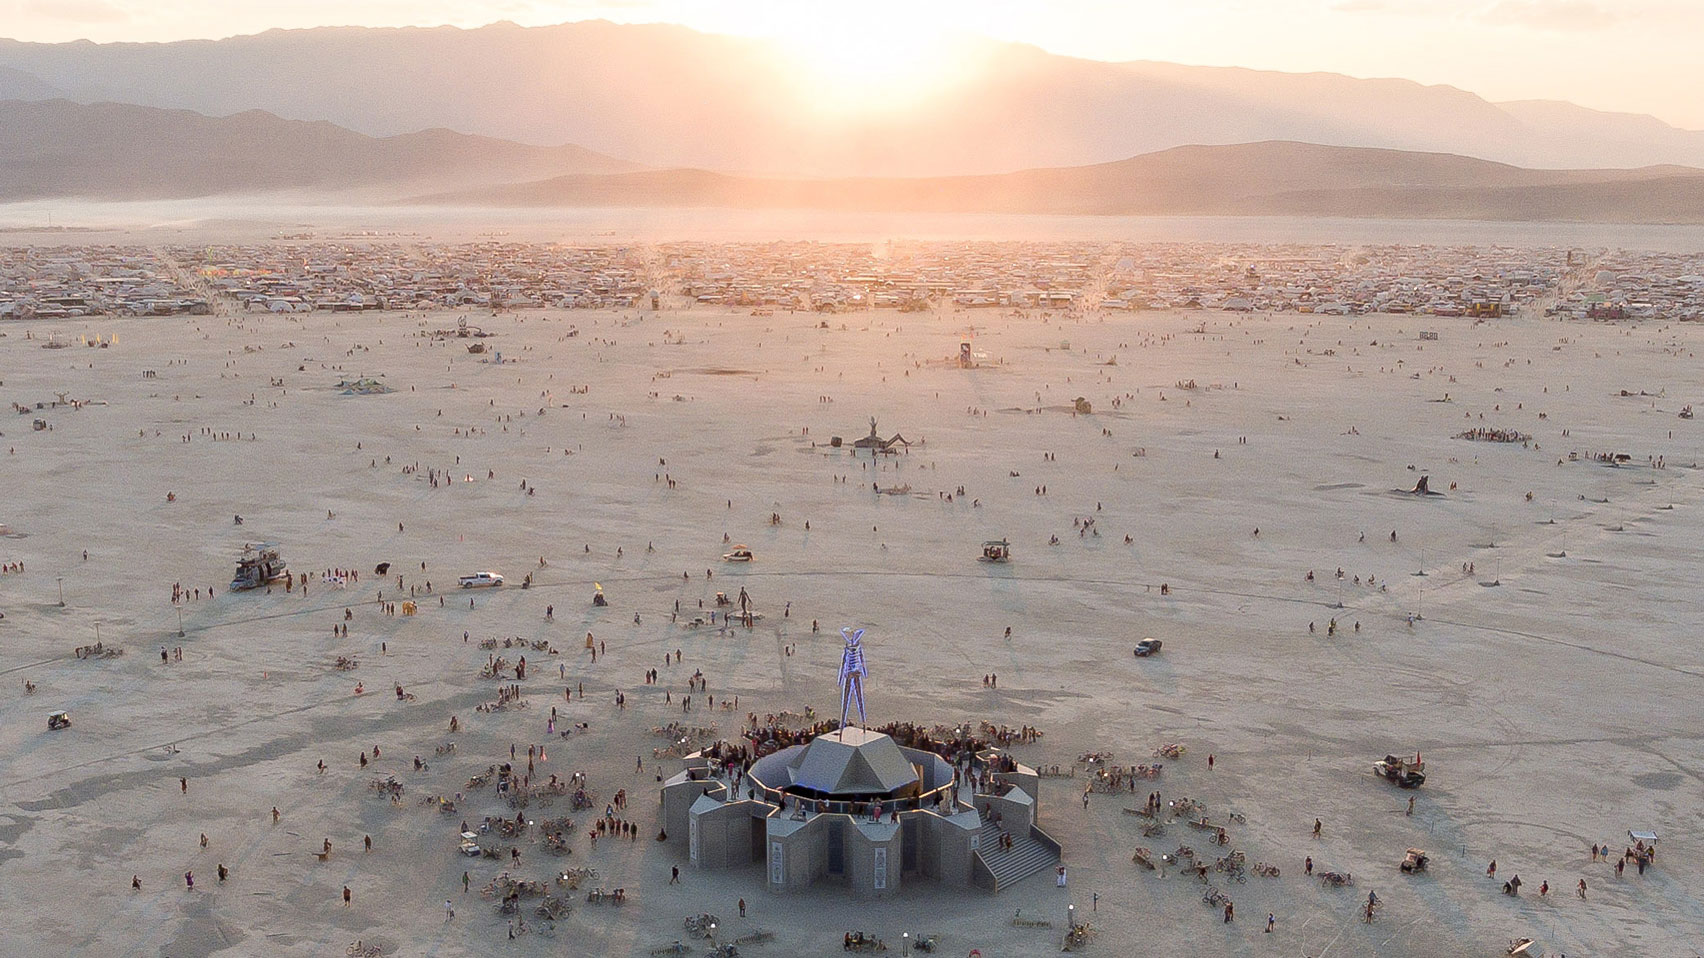 deb flaharty recommends burning man 2018 webcam pic